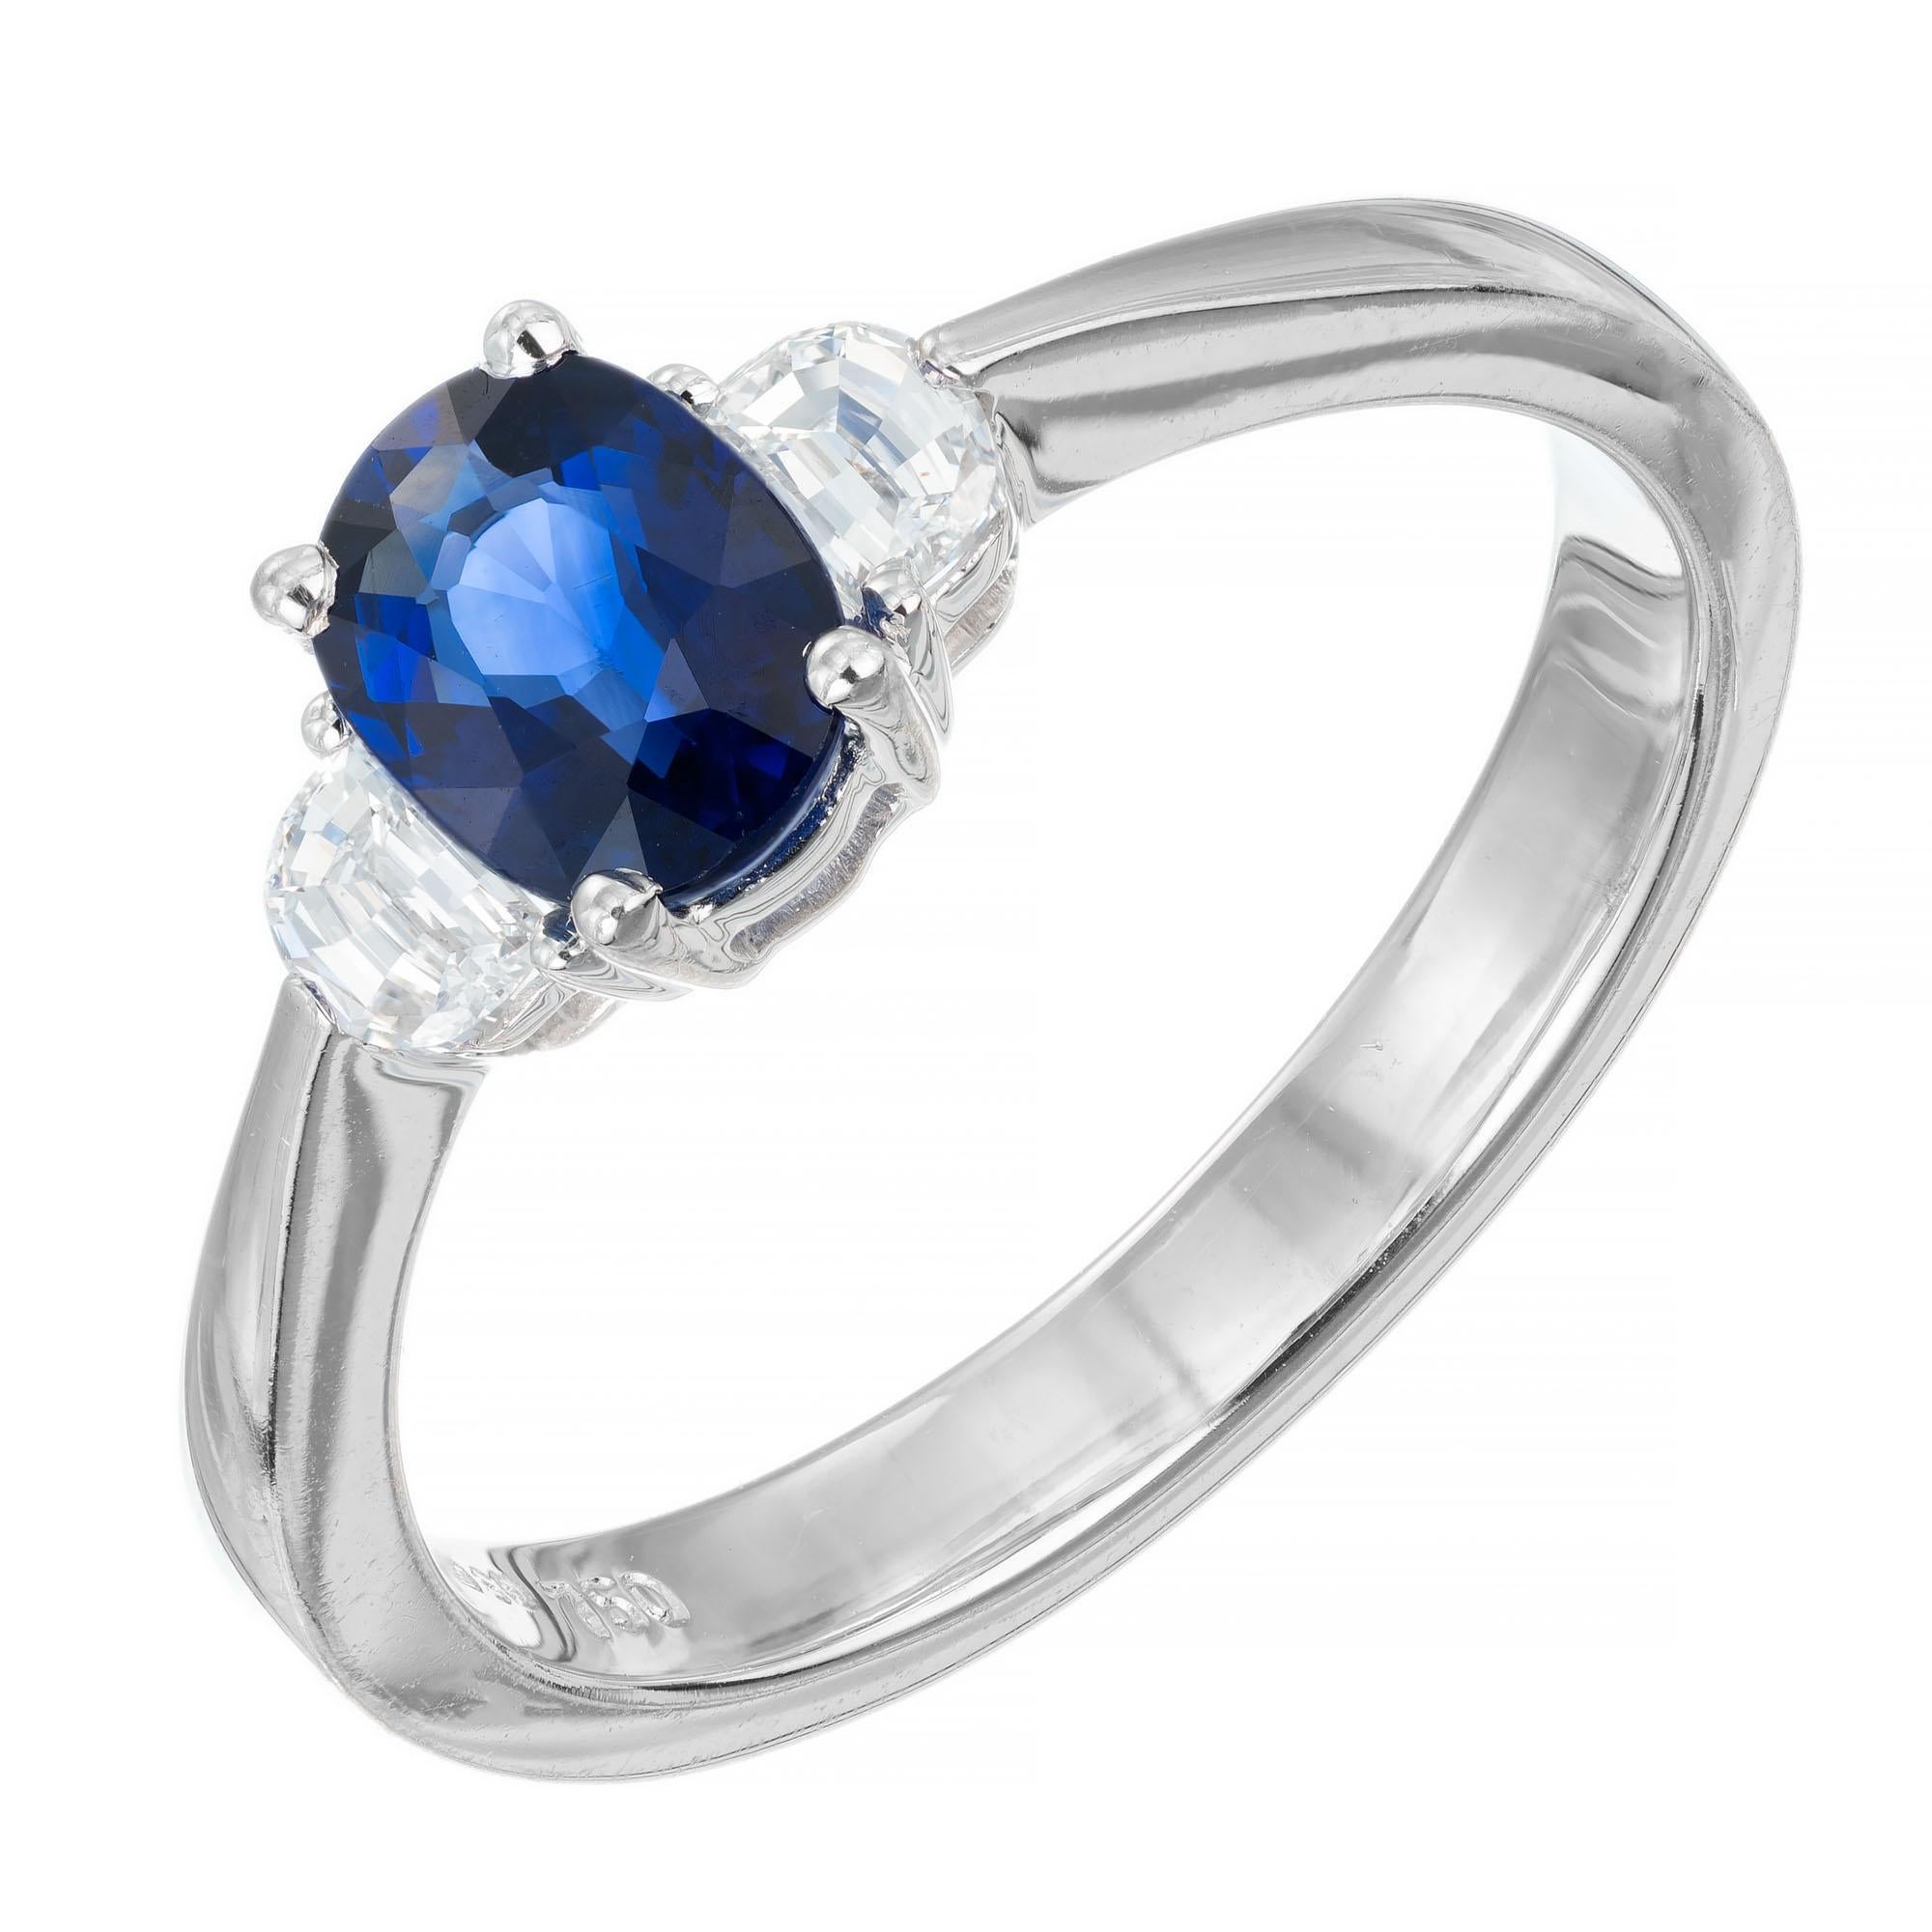 Sapphire and diamond engagement ring. GIA certified oval center stone with two half-moon side diamonds in a three-stone 18k white gold setting. 

1 GIA certificate #2145602011 oval Sapphire natural, approx. total weight .60cts, simple heat only, no